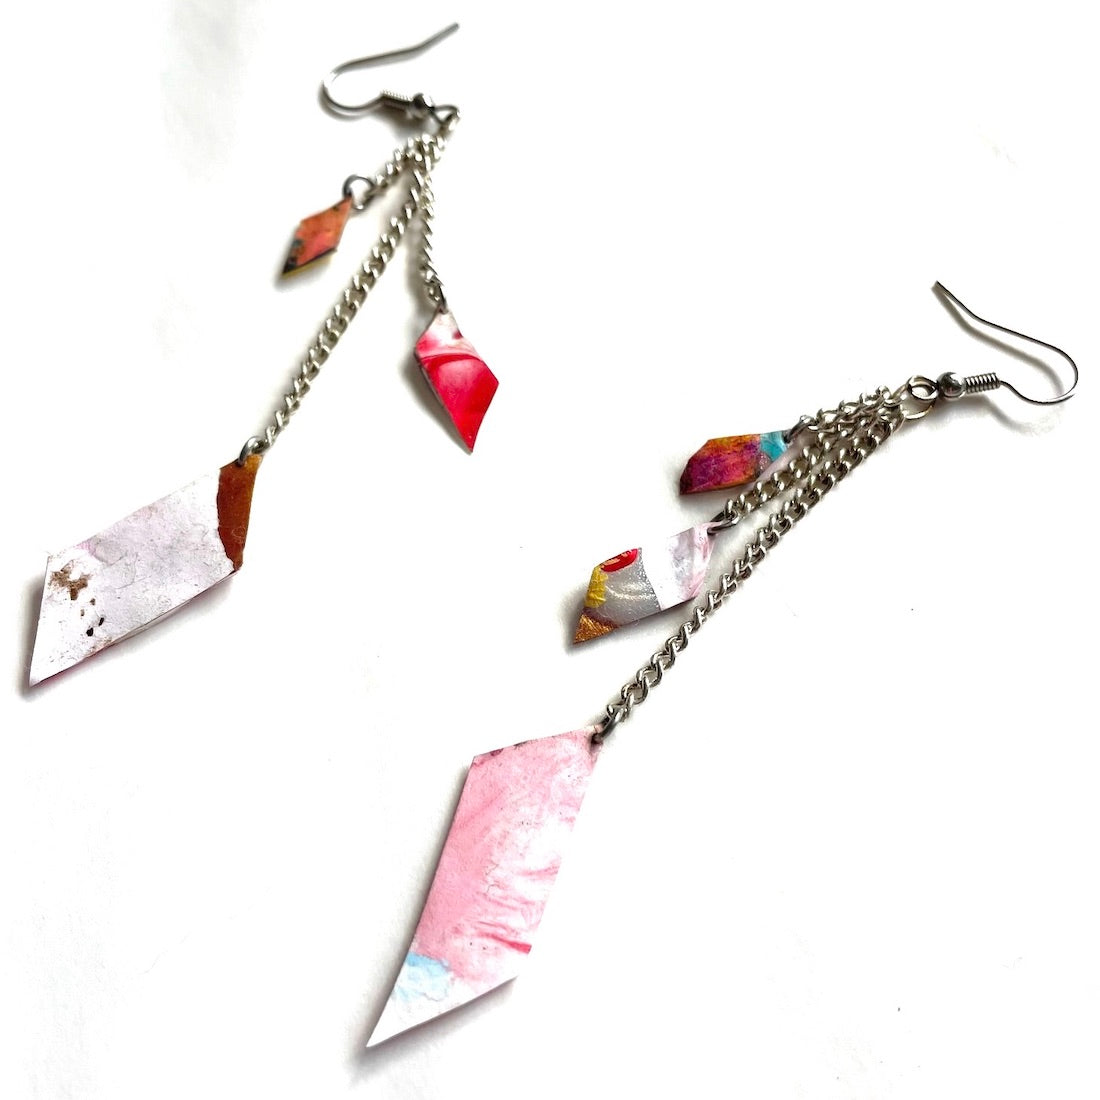 recycled paint palettes turned into jewelry art from Carini Arts